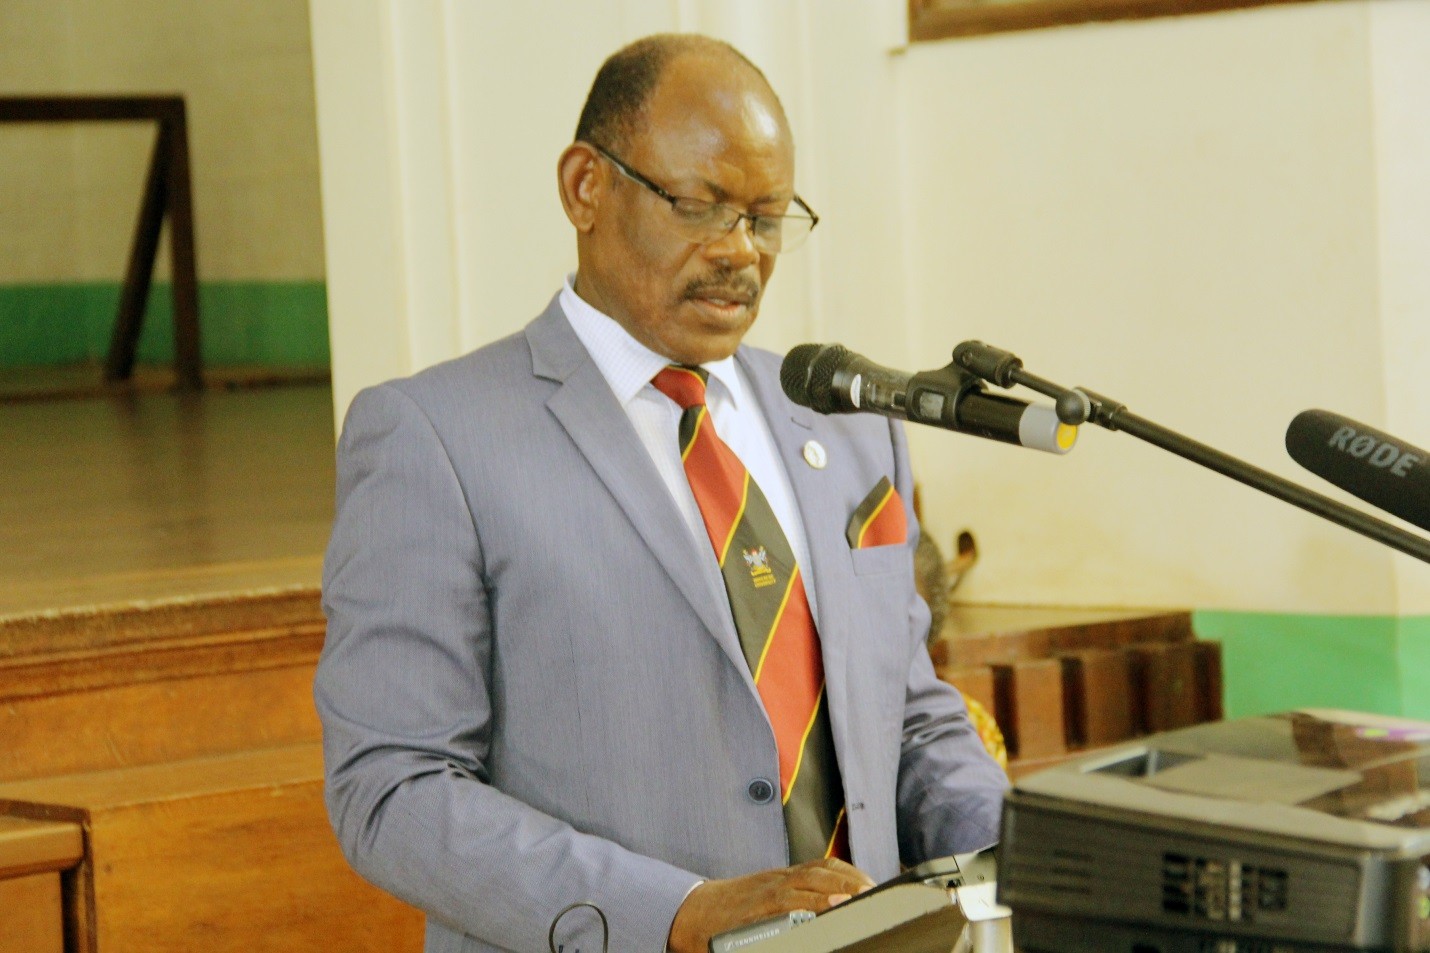 The Vice Chancellor of Makerere University, Prof Barnabas Nawangwe, affirmed that the university will play a leadership role in the fight against Schistosomiasis